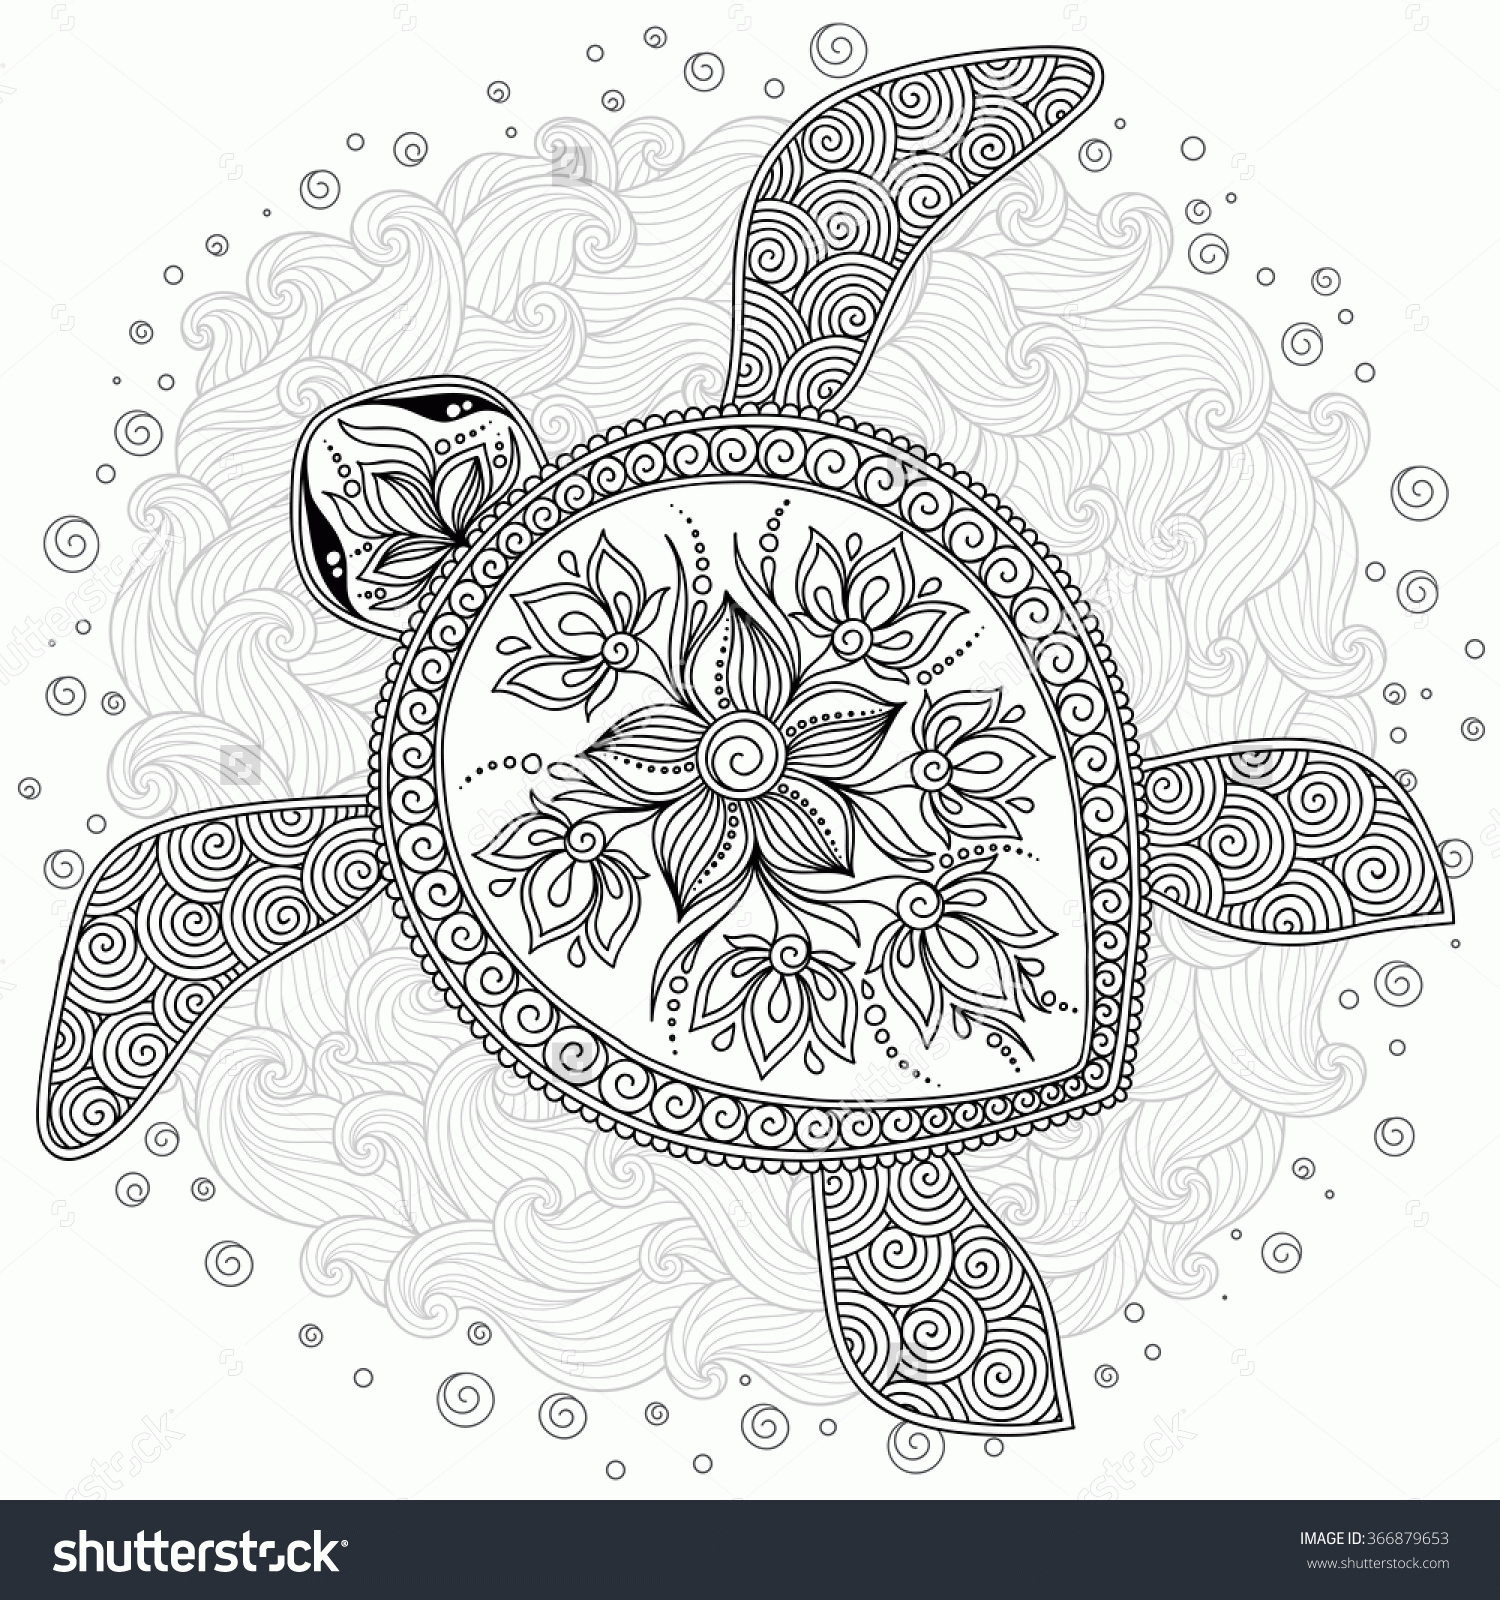 Coloring Pages: Hand Drawn Sea Turtle Mascot For Adult Coloring ...